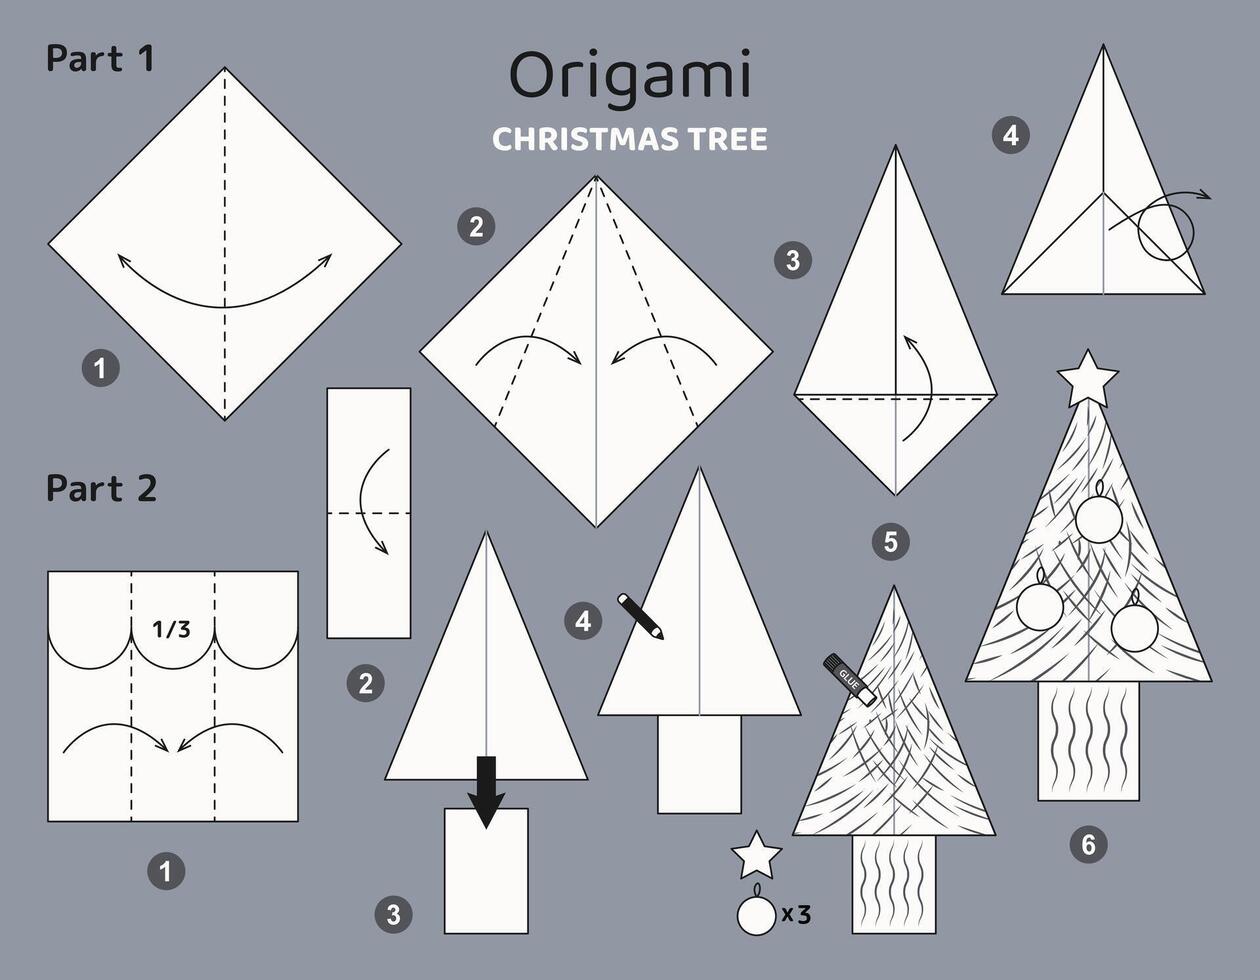 Christmas tree origami scheme tutorial moving model. Origami for kids. Step by step how to make a cute origami fir. Vector illustration.